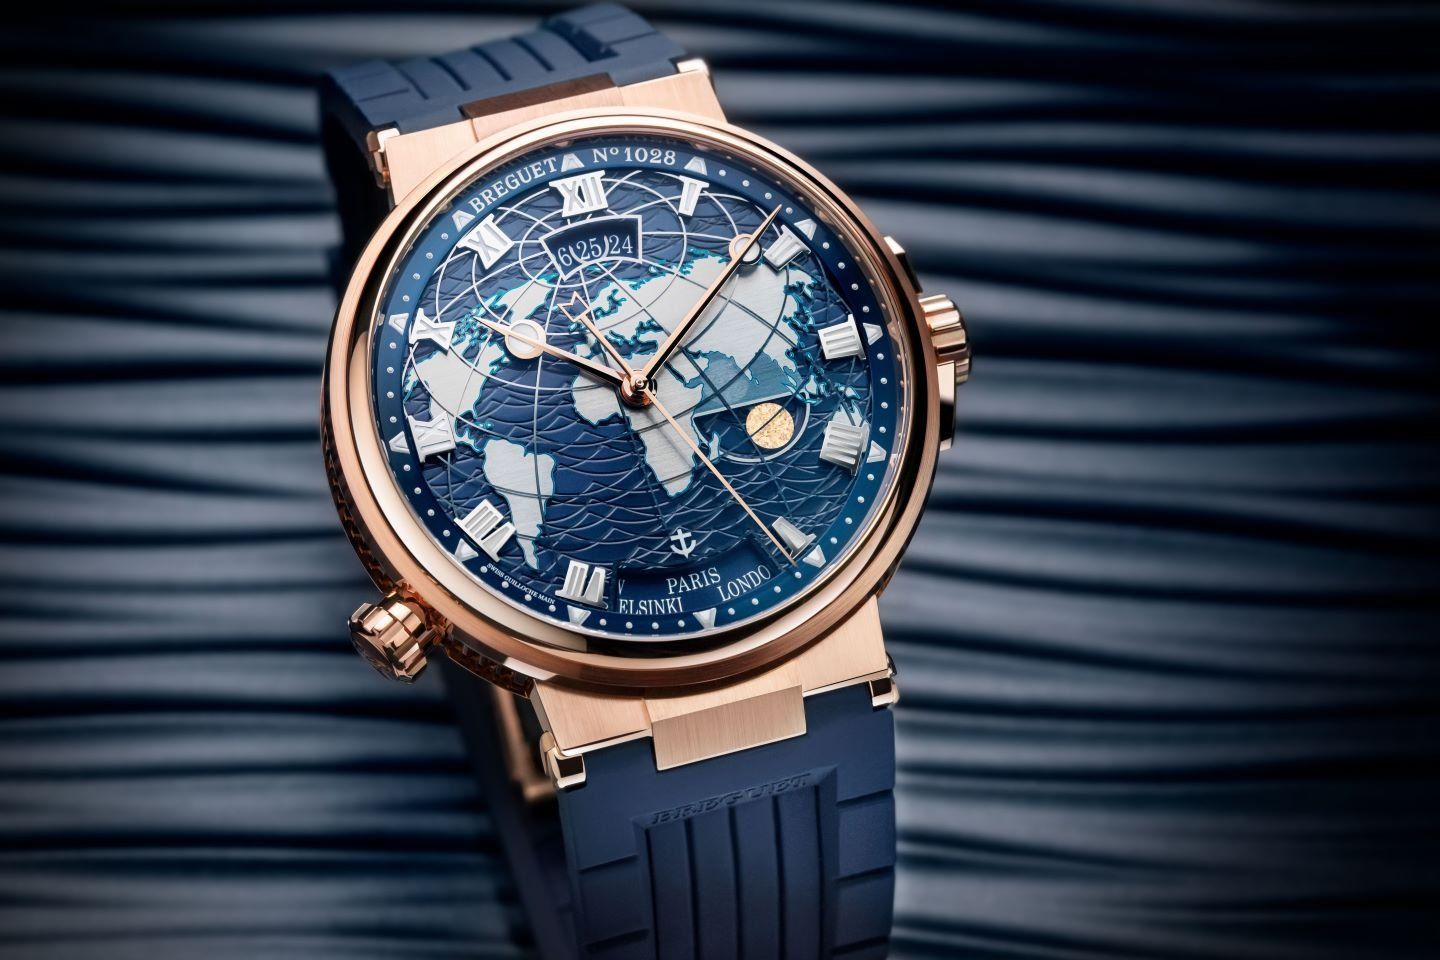 Behind the Dial: The Story Of The Breguet Hora Mundi 5557